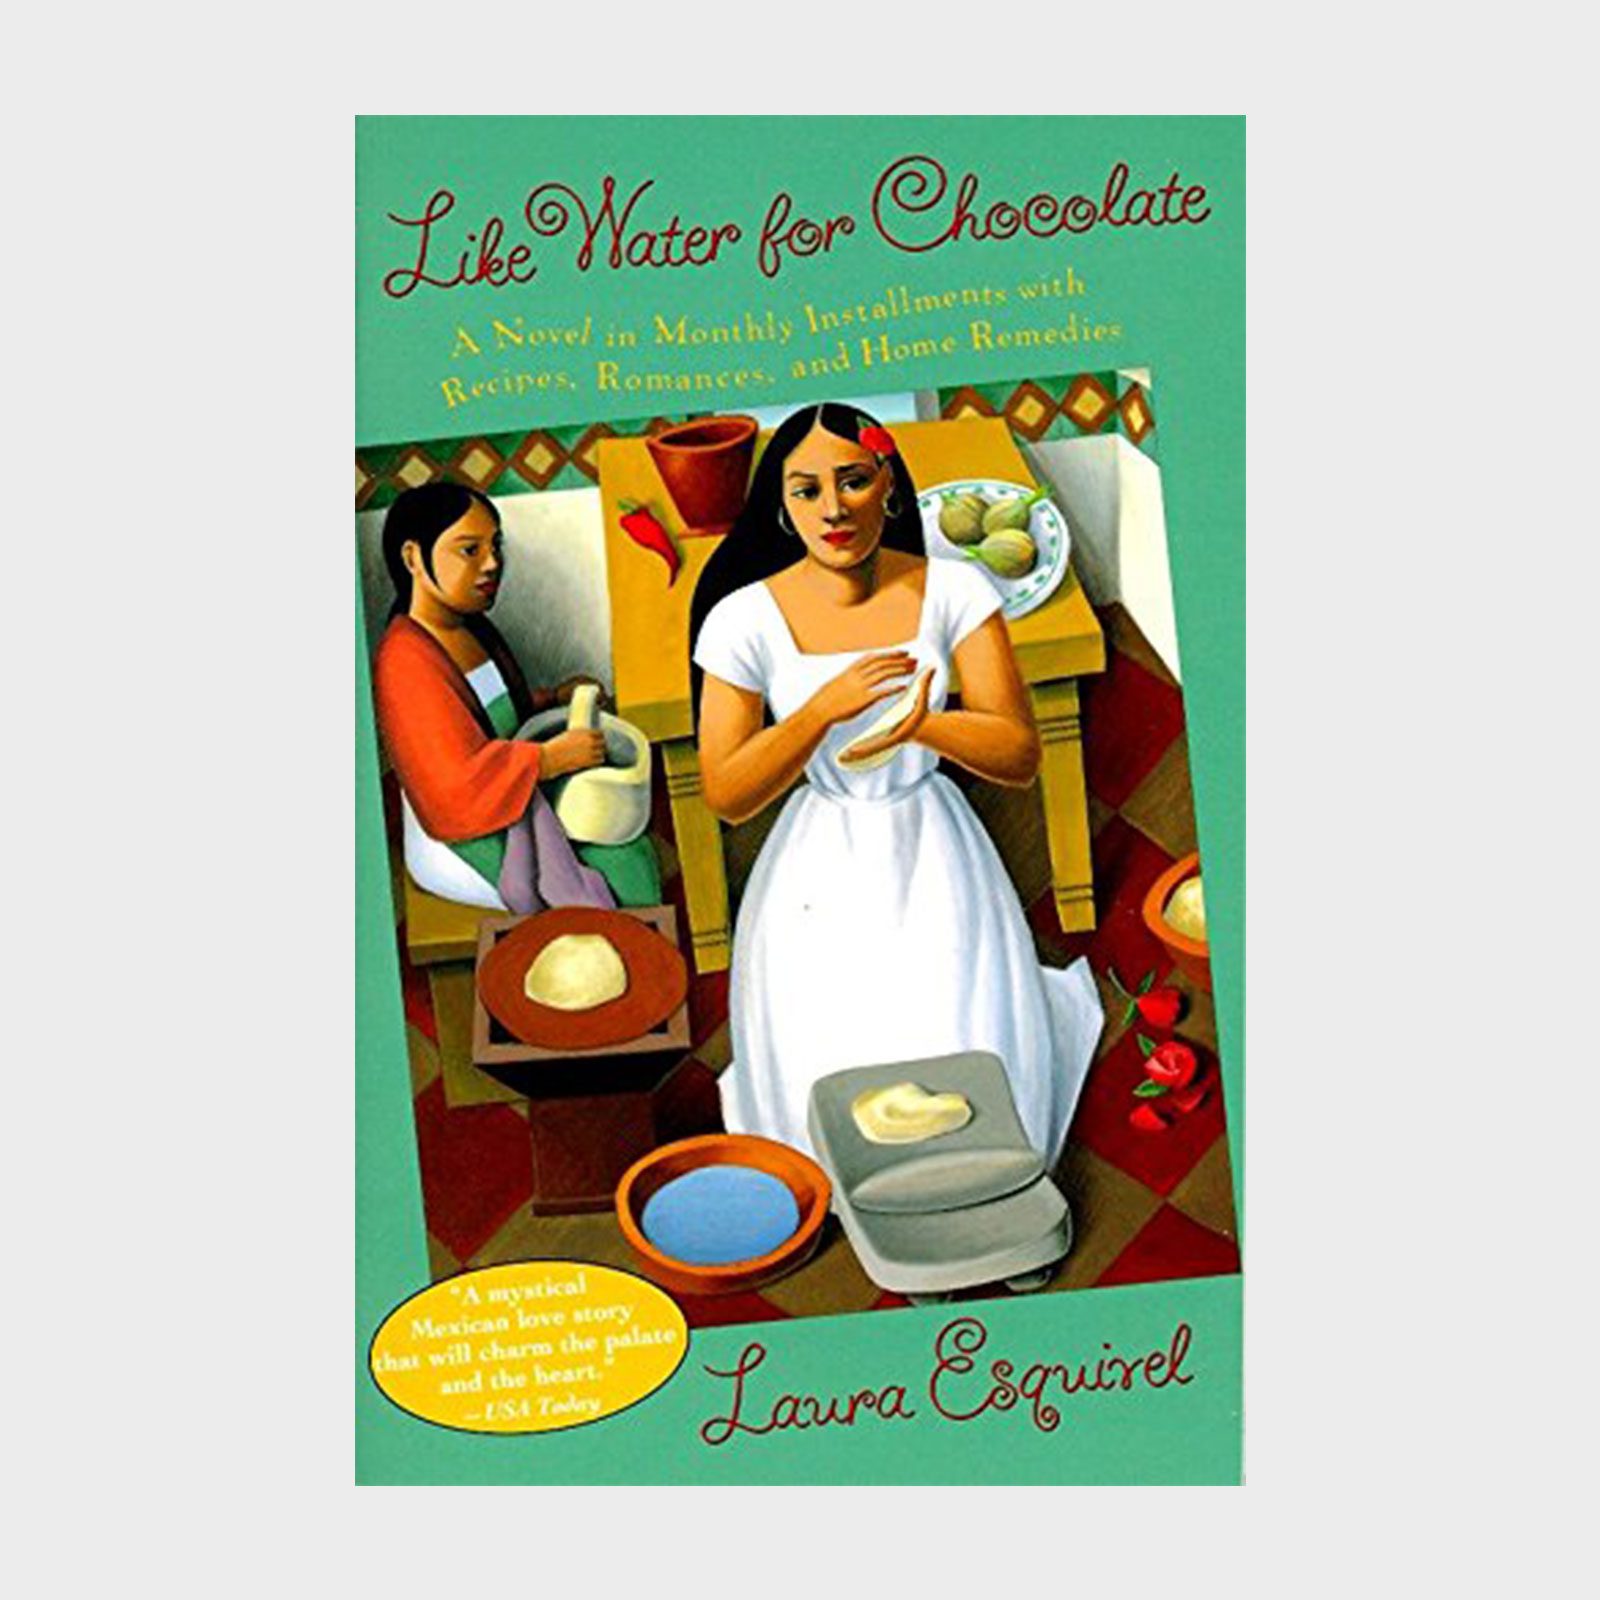 <p>I recently reread this classic novel, and its flavors burn even brighter (and the family story strikes harder) than when I first read it back in college. Set in Northern Mexico during the Mexican Revolution, this 1989 novel tells the story of Tita De la Garza through recipes. It's a fitting format—<a href="https://www.amazon.com/Like-Water-Chocolate-Installments-Romances/dp/038542017X/" rel="noopener noreferrer"><em>Like Water for Chocolate</em></a> centers on food in both magical and mundane ways. The fable-like and <a href="https://www.rd.com/list/best-romance-novels-of-all-time/" rel="noopener noreferrer">romantic novel</a> sees Tita tangle with love yet be forced to remain a spinster so she can take care of her mother. Her complex feelings magically infuse her food and dishes. With themes of fate and family, the story of the De la Garza women plays out as their passions are hidden, forbidden and expressed.</p> <p class="listicle-page__cta-button-shop"><a class="shop-btn" href="https://www.amazon.com/Like-Water-Chocolate-Installments-Romances/dp/038542017X/">Shop Now</a></p>